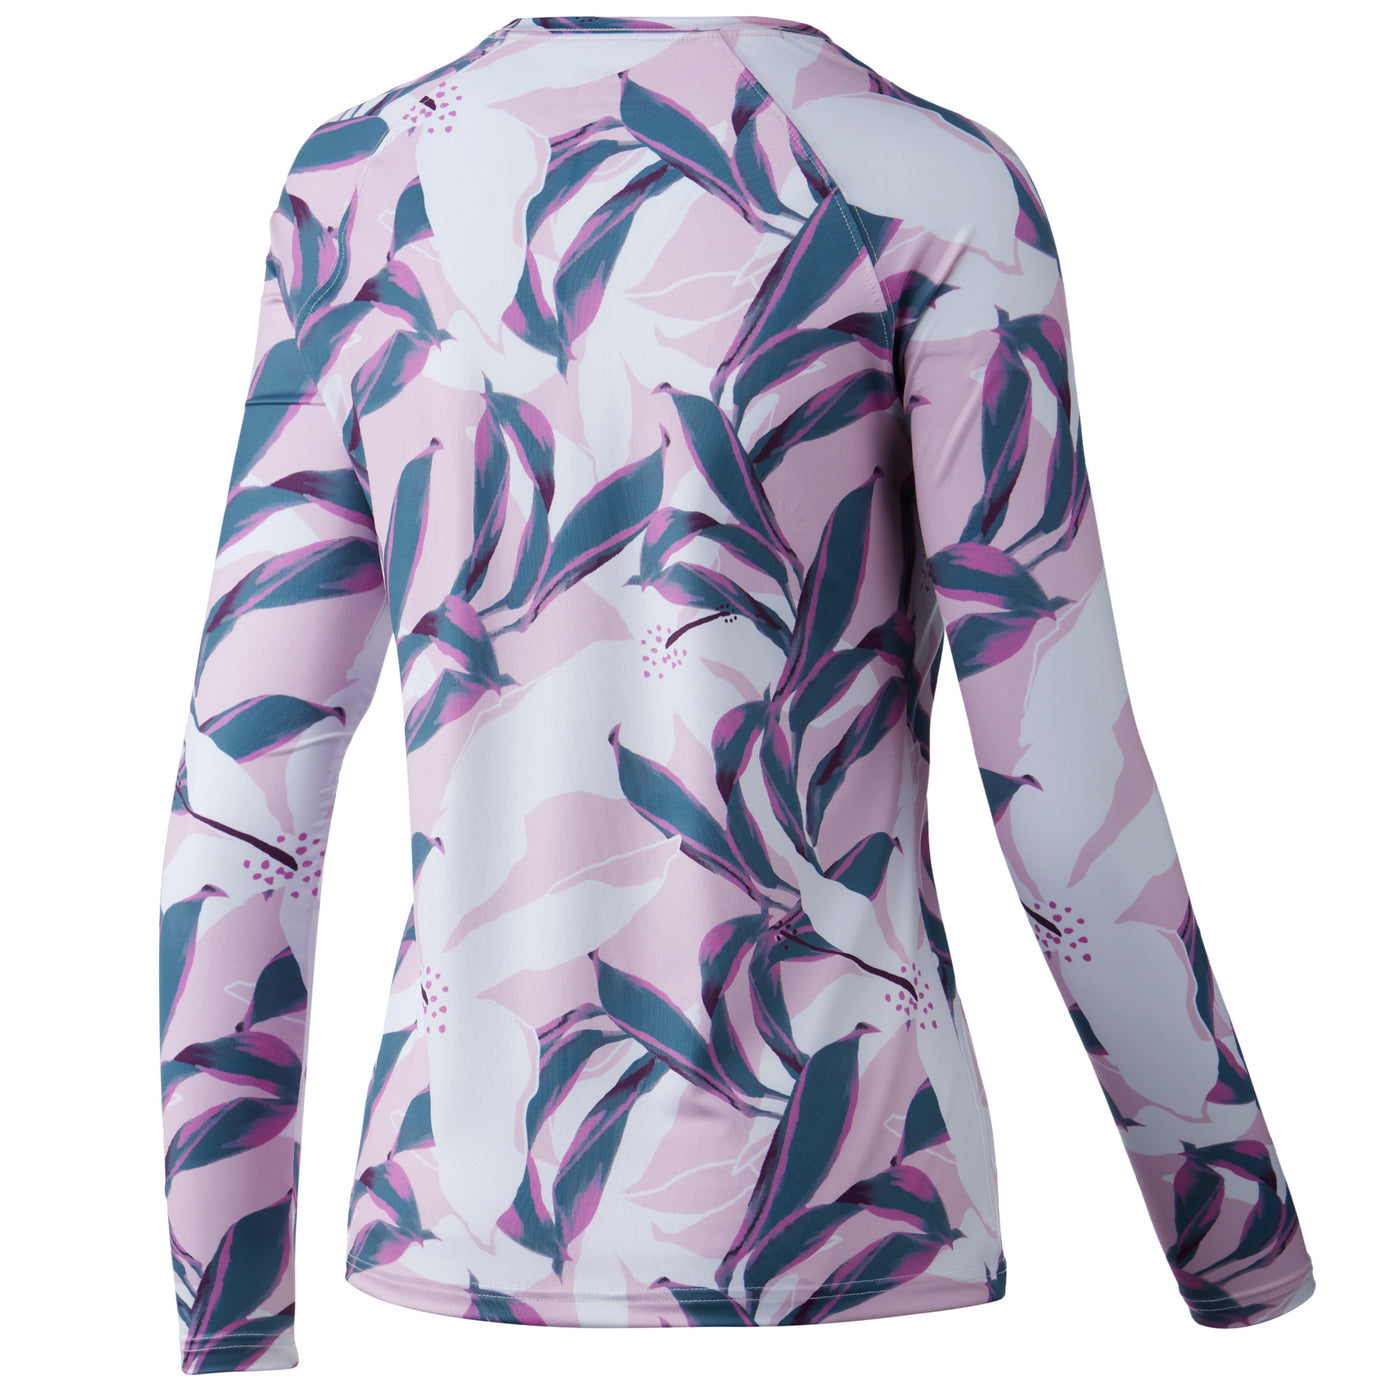 Huk Womens Tall Leaves Pursuit